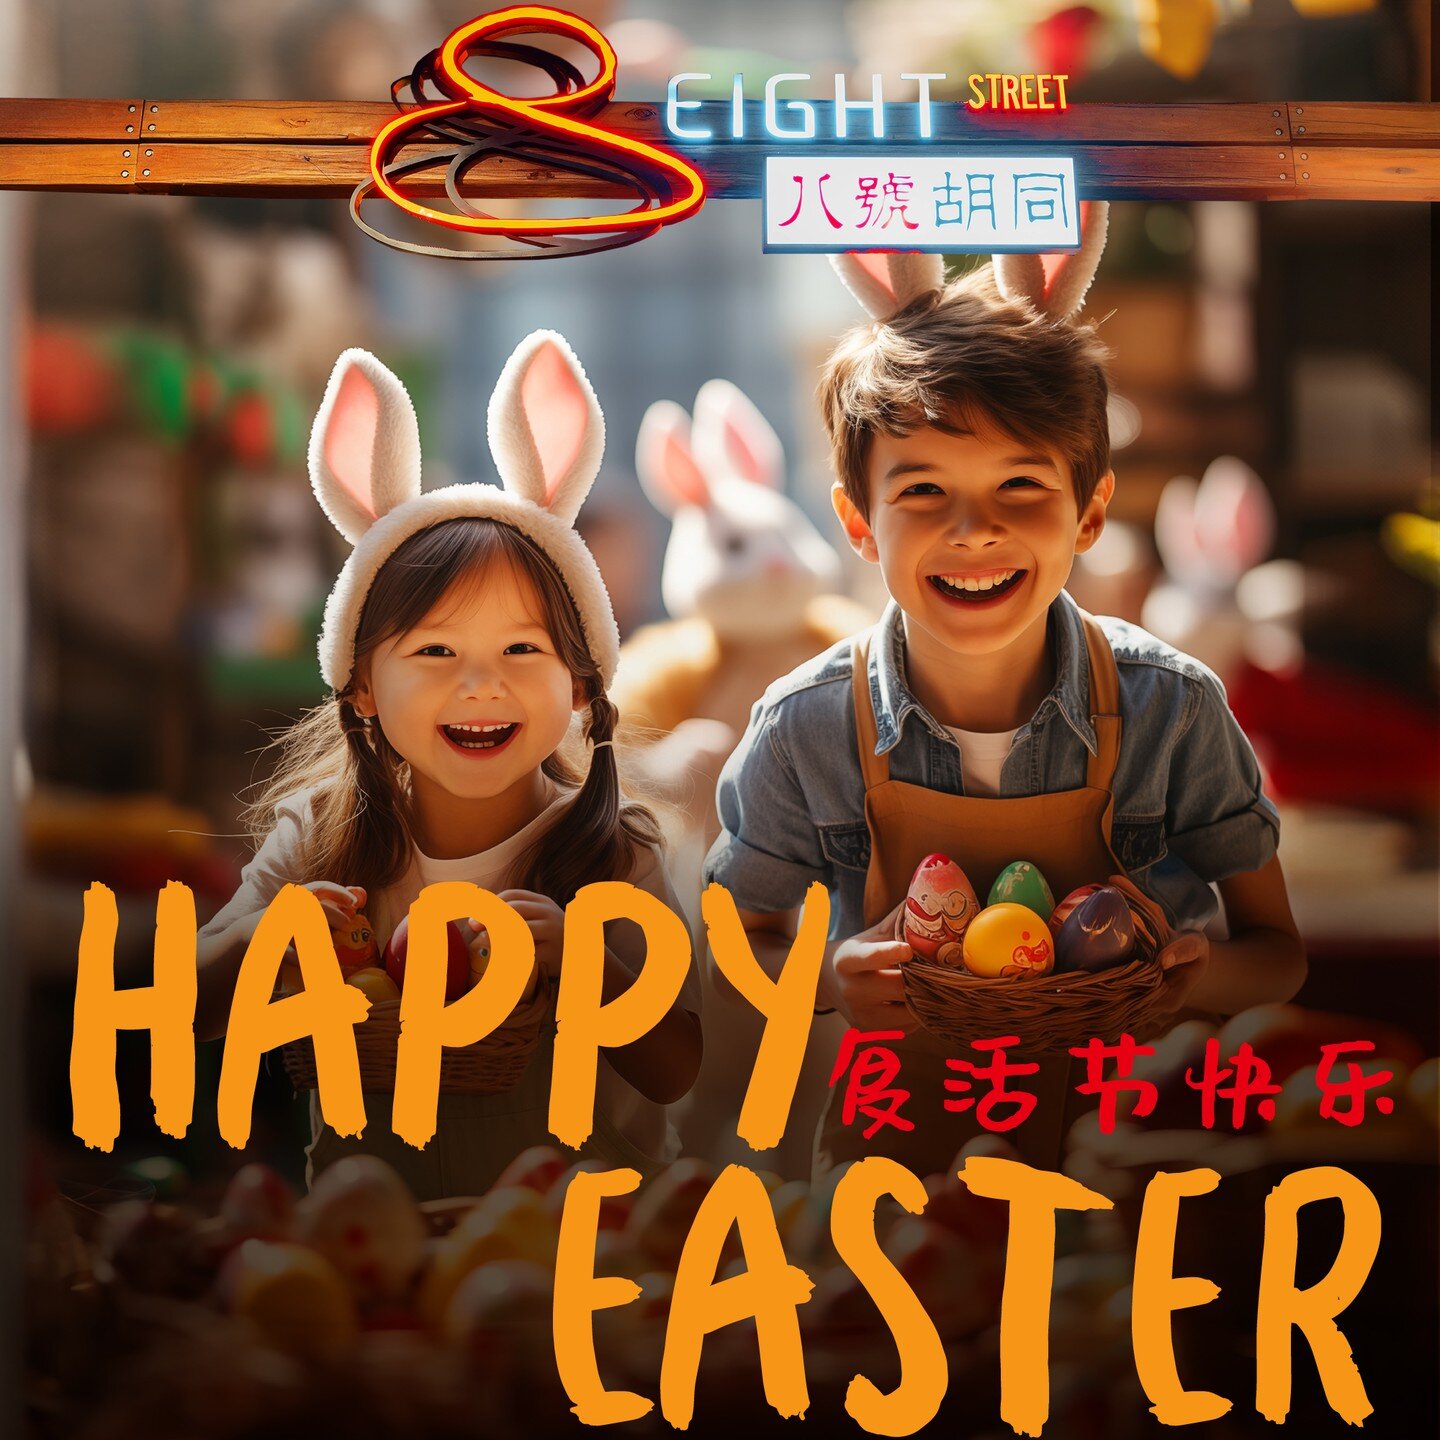 Hoppy Easter! Wishing you an egg-straordinary Easter filled with sweet moments and joyous memories shared with your loved ones. May this holiday be a time of happiness, laughter, and togetherness for you and your family.

#8streetgardencity #8streetm